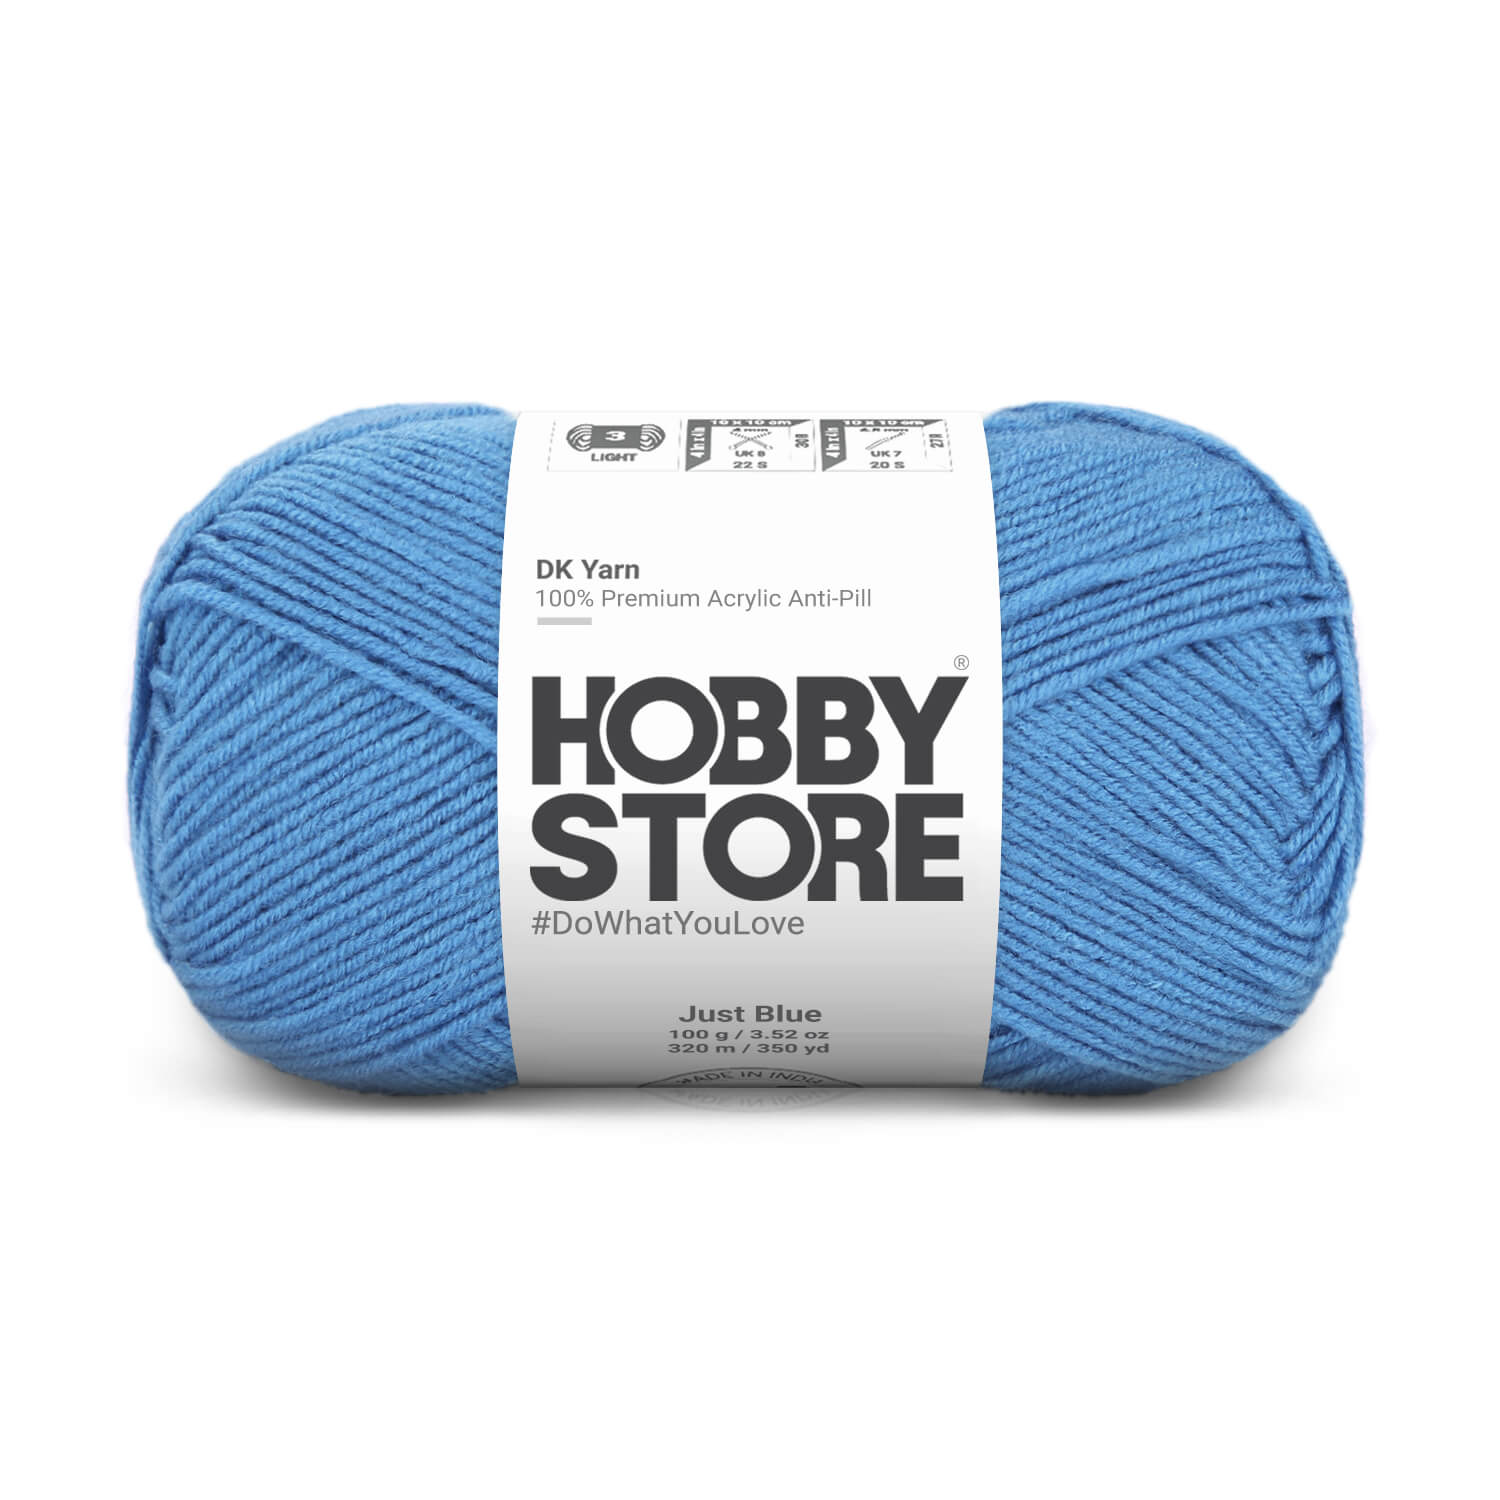 DK Anti-Pill Yarn by Hobby Store - Just Blue 5043